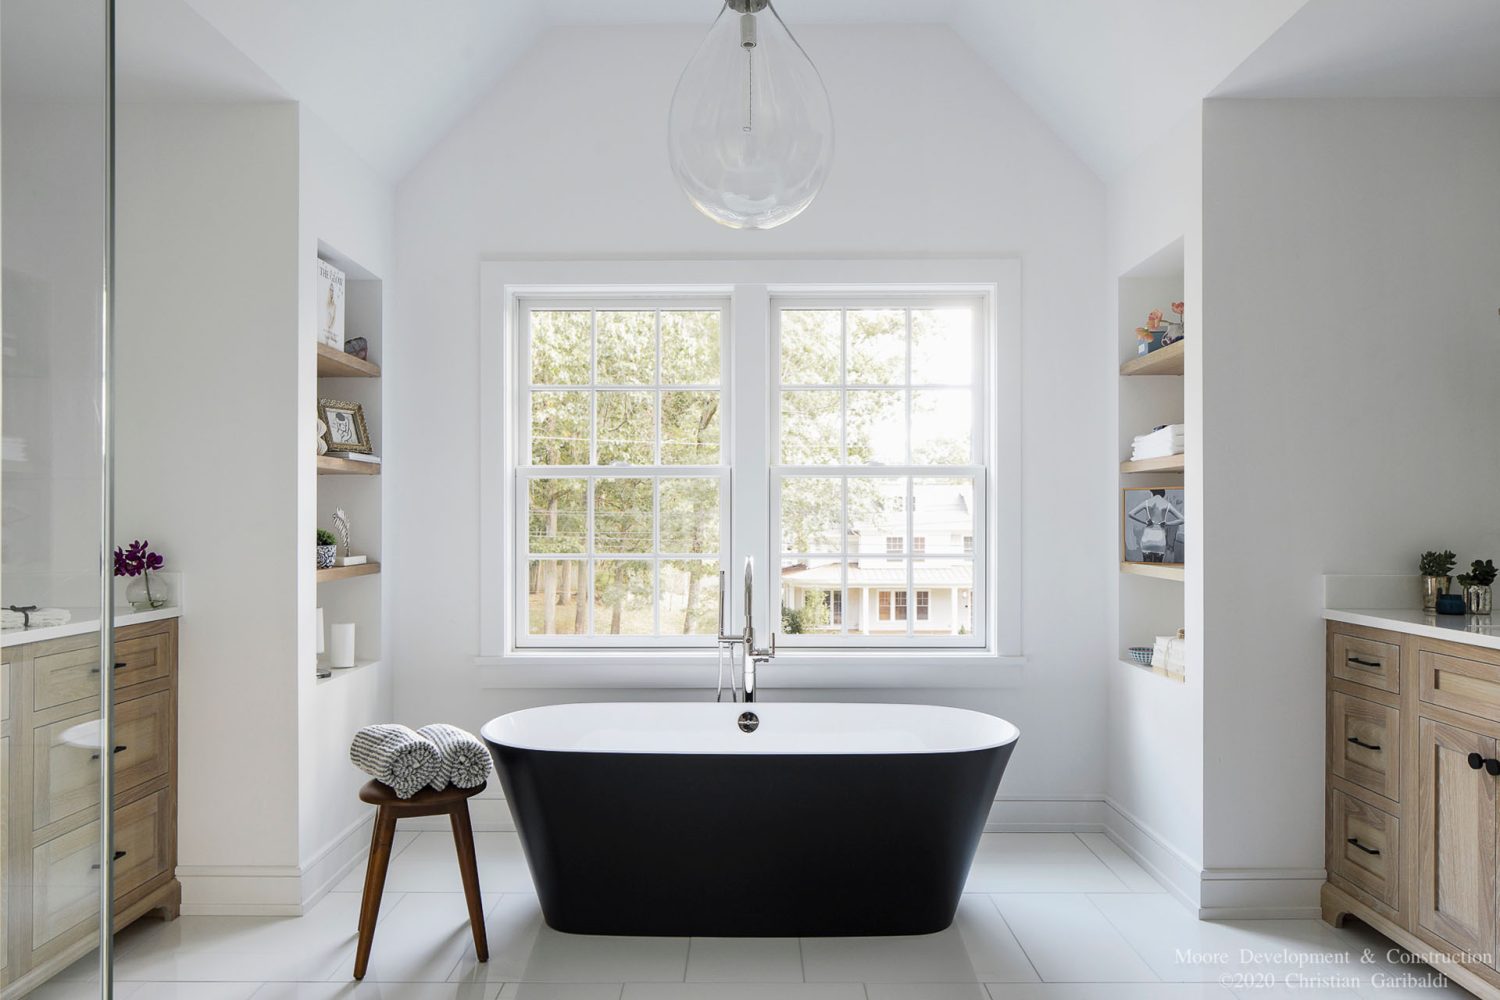 A white-walled bathroom with a modern, freestanding tub that is black outside and white inside. There is a small wooded stool near the tub with two rolled, striped towels on top.